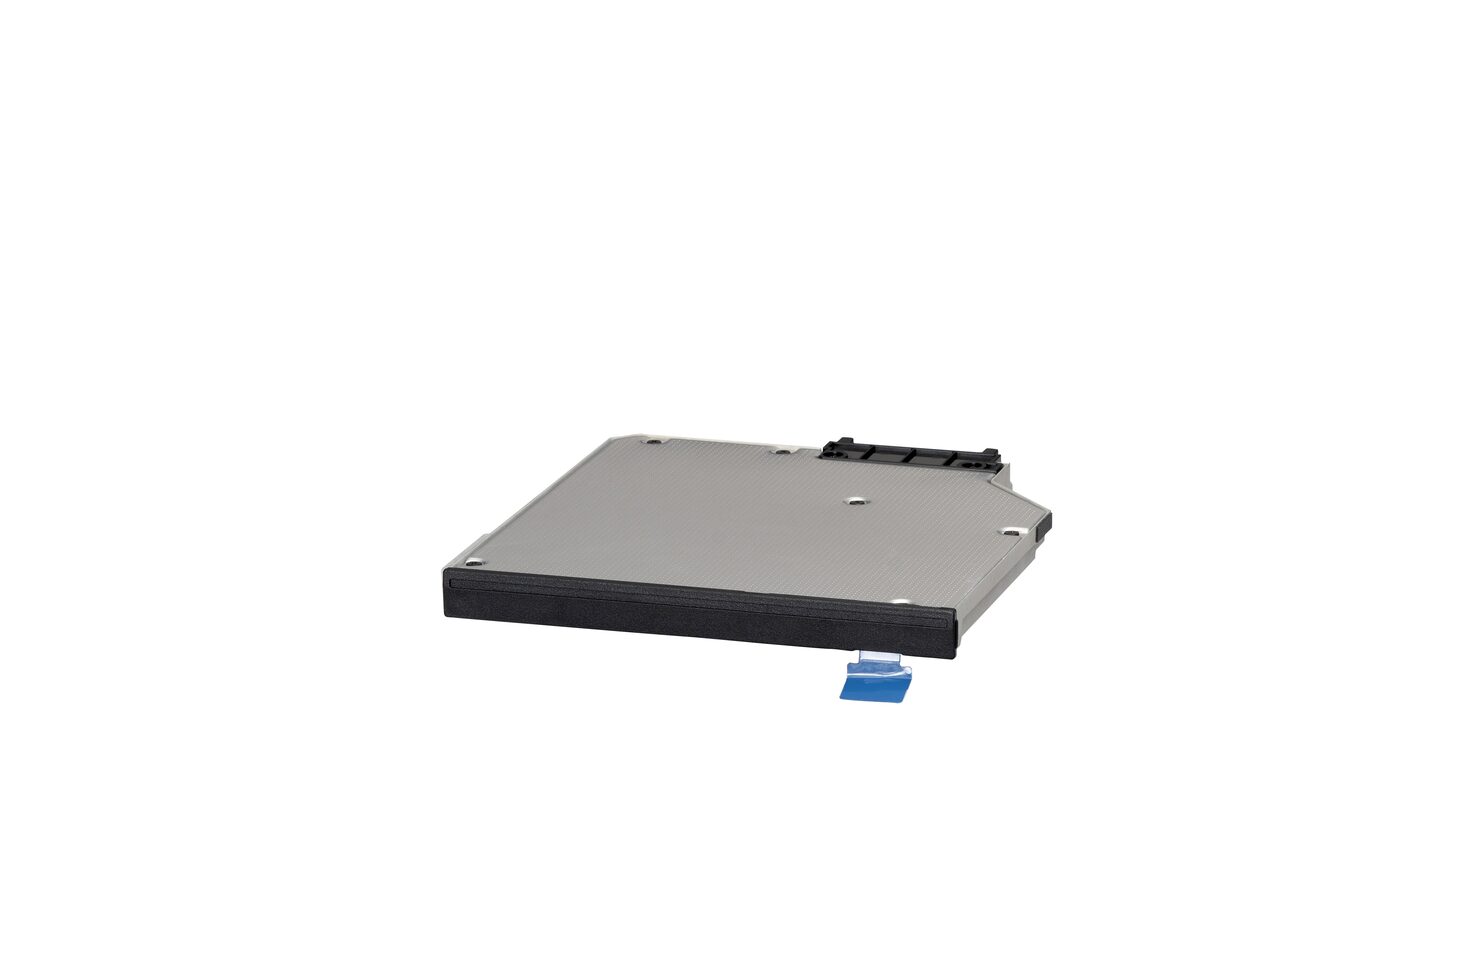 <span style="font-size: 12.6px;">FZ-V2S400T1U, FZ-V2S401T1U - 2nd SSD (Left Expansion Area)</span>